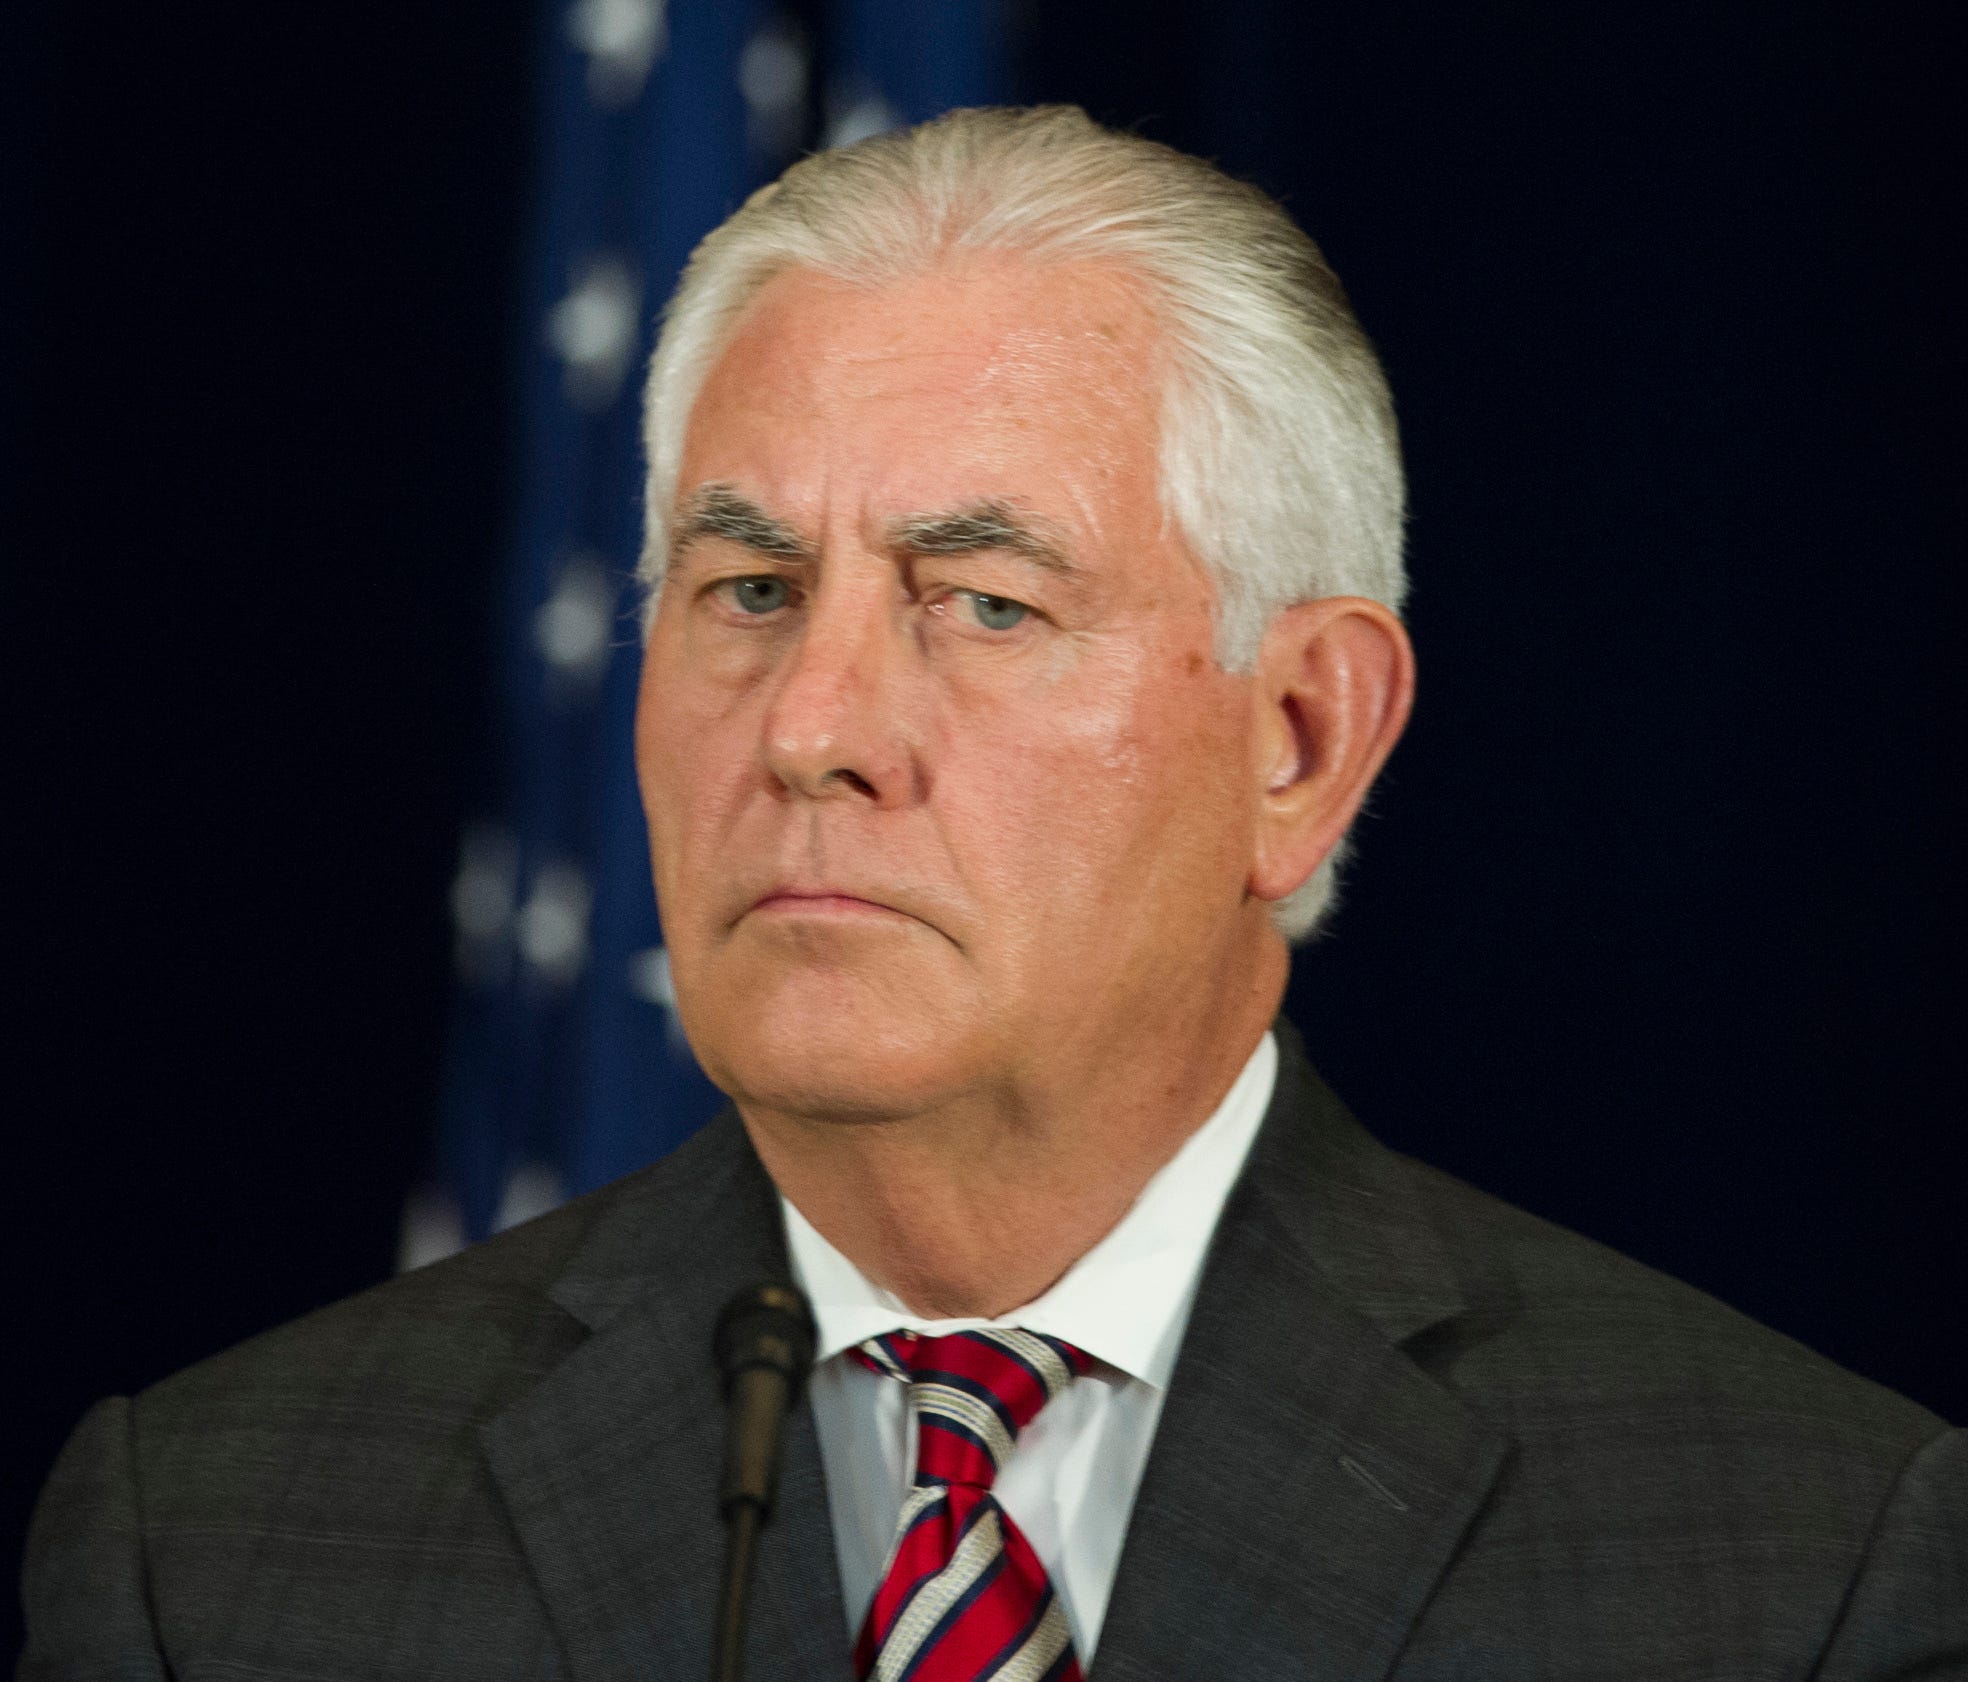 Secretary of State Rex Tillerson appears at a news conference at the State Department in Washington.